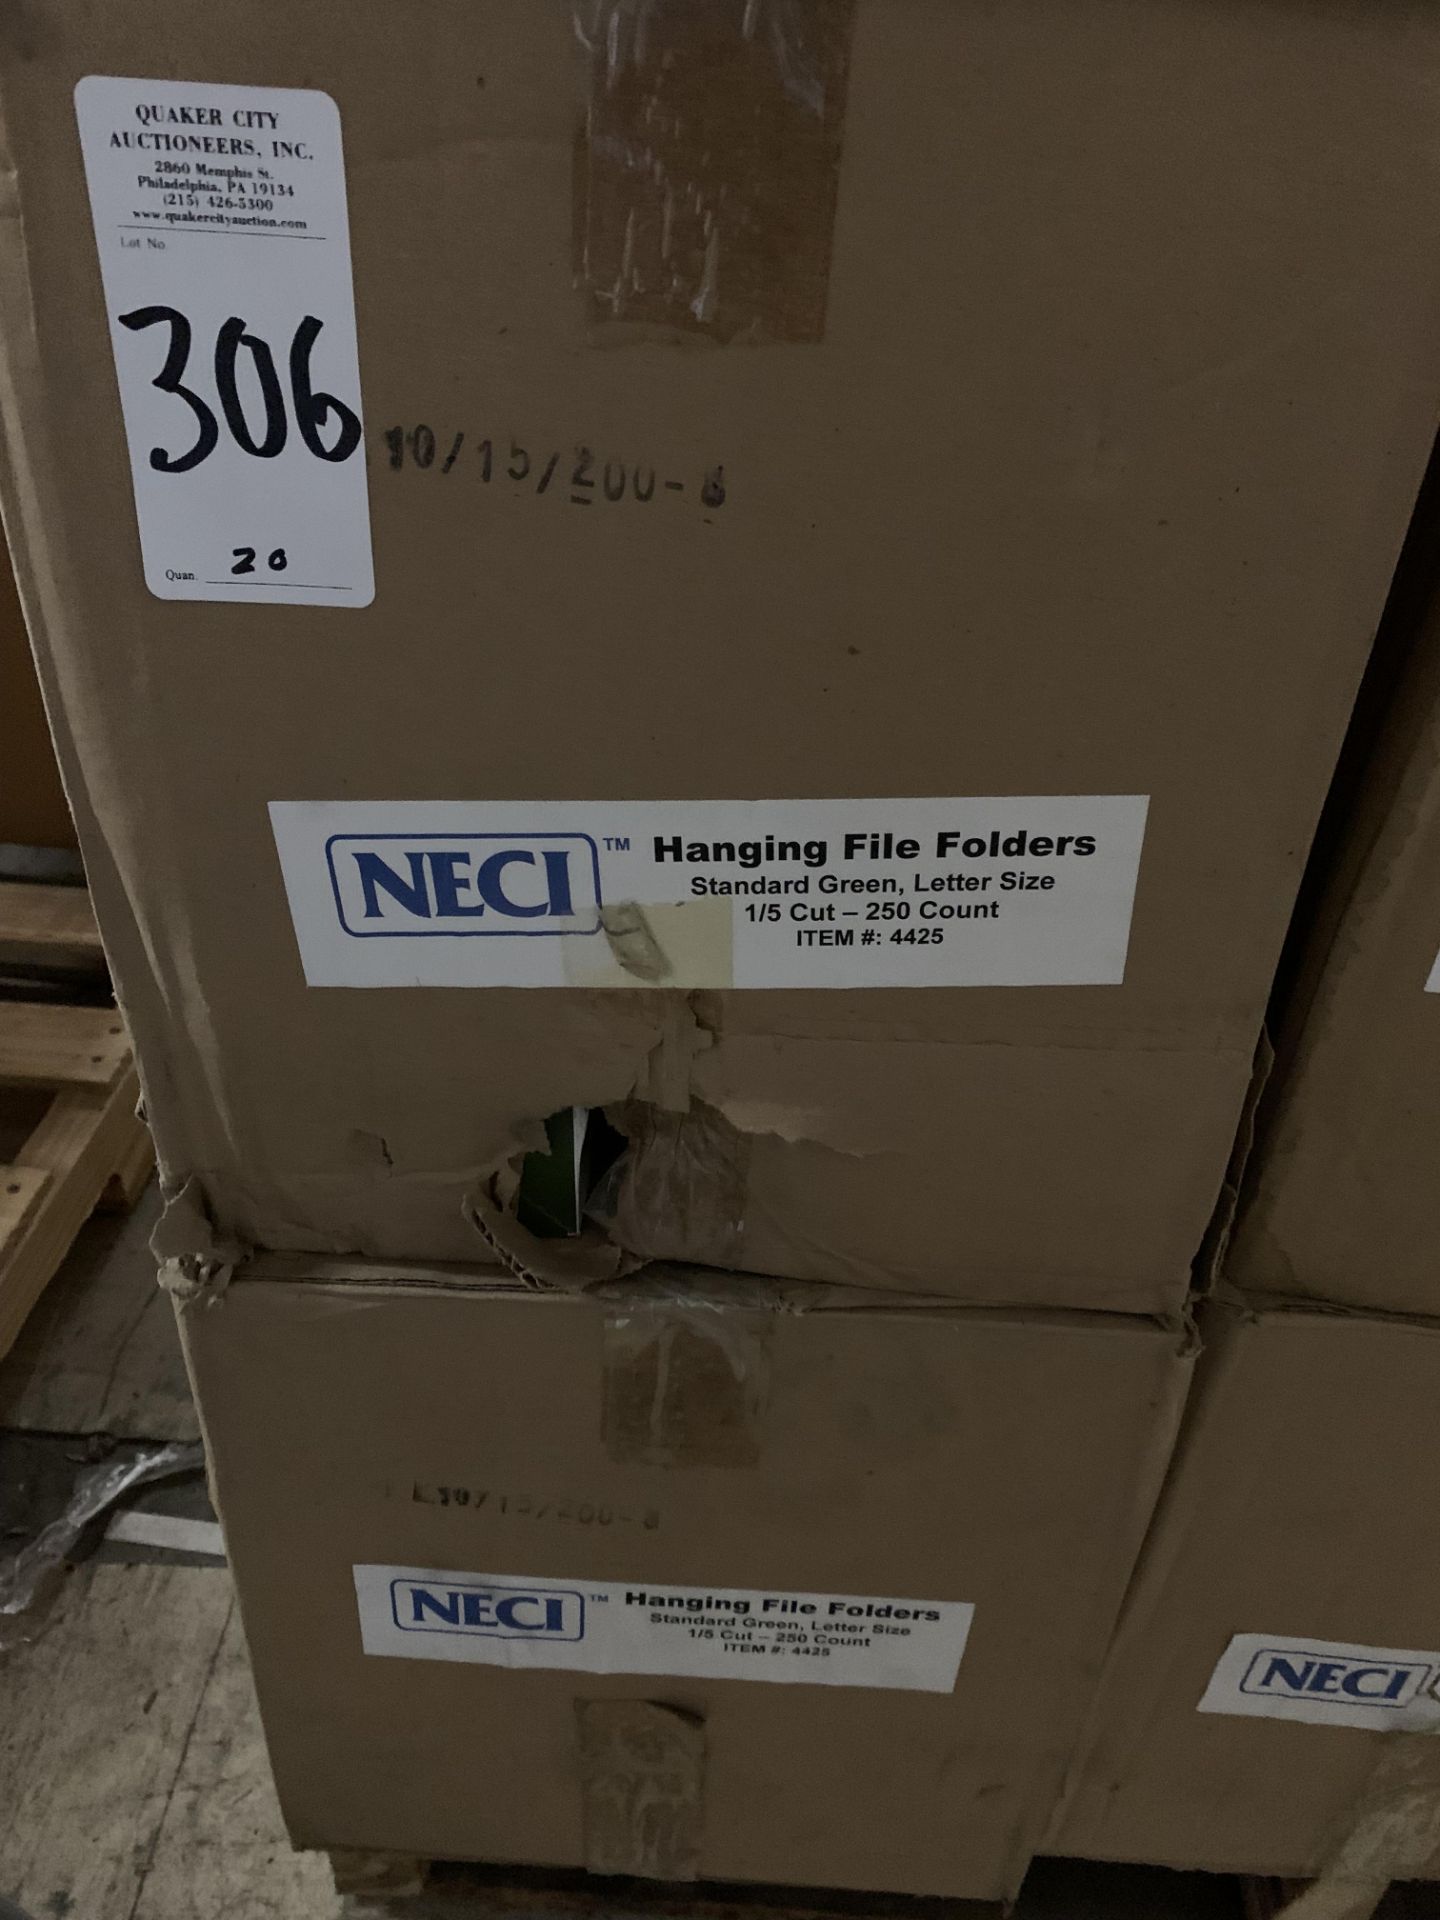 (20 BOXES) OF NECI 4425 STANDARD GREEN LETTER SIZE 1/5 CUT HANGING FILE FOLDERS (25/PER BOX)